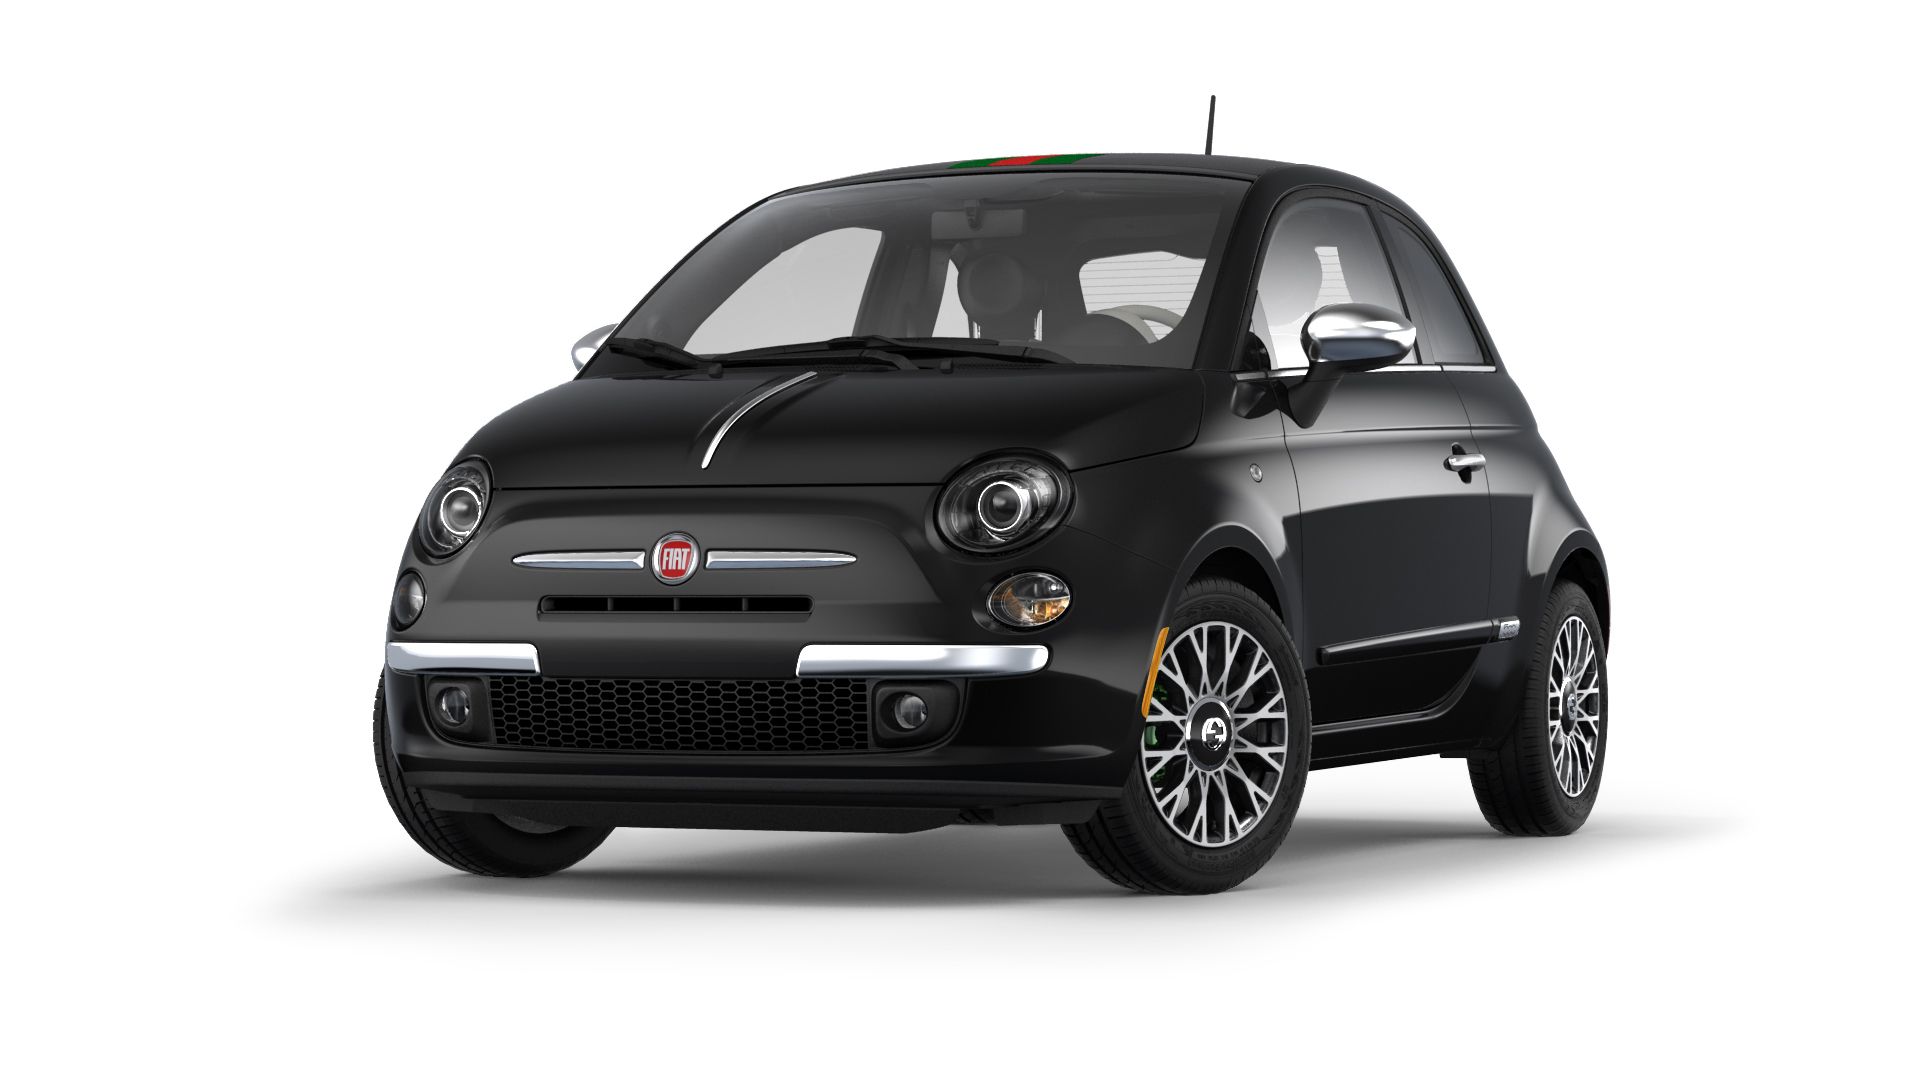 2013 Fiat 500 and 500C by Gucci